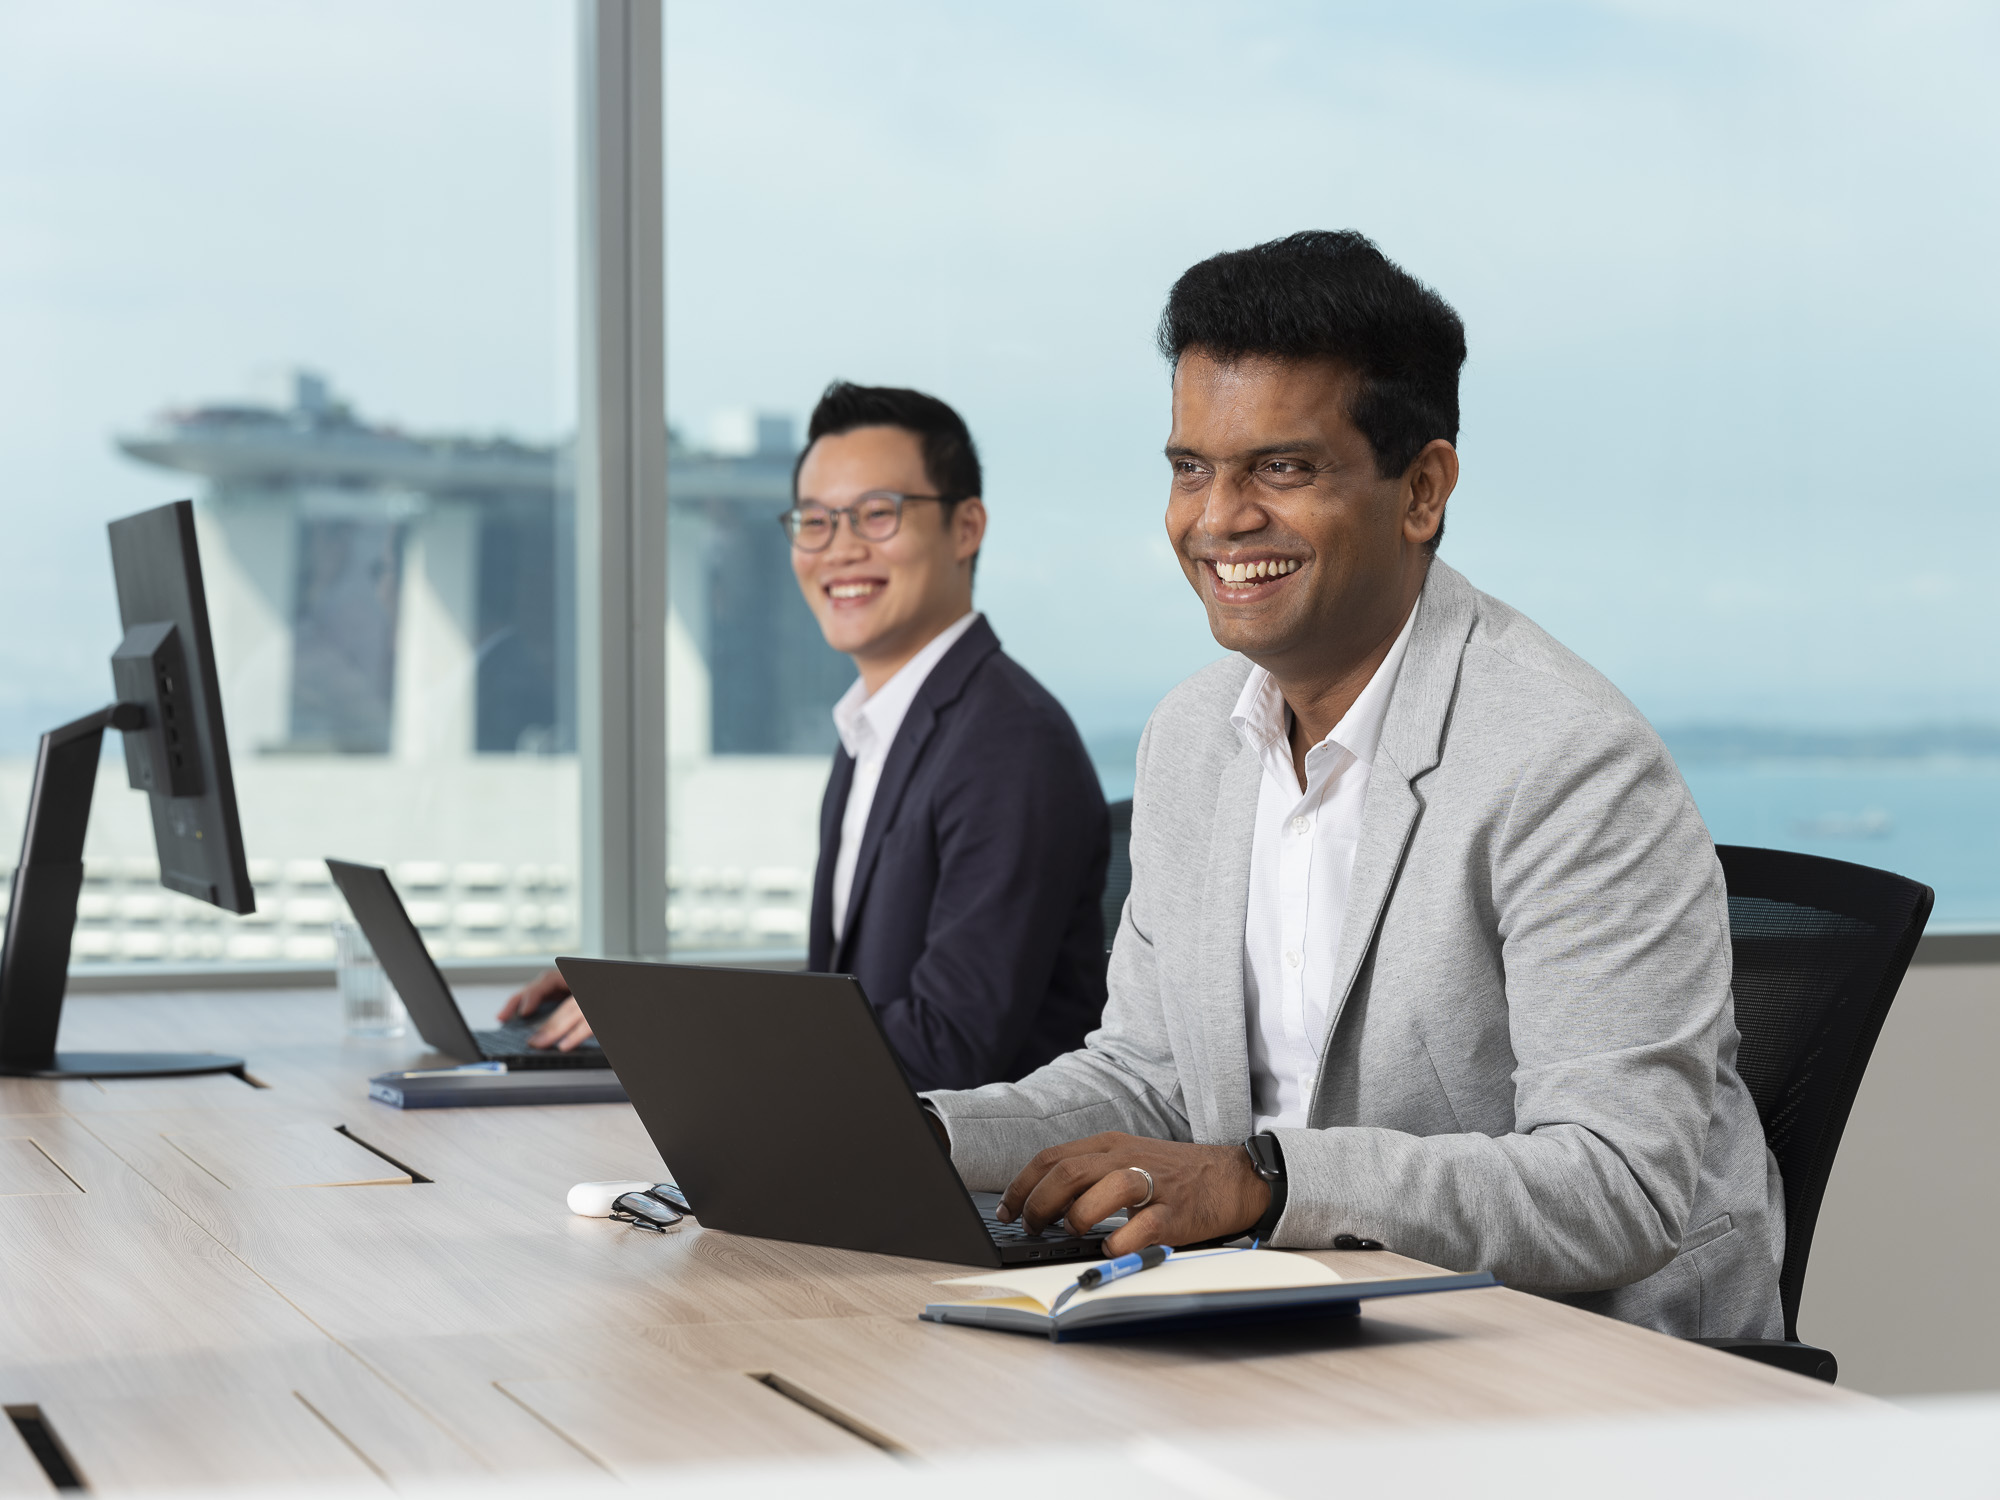 Commercial photography studio stock office image Singapore corporate 4